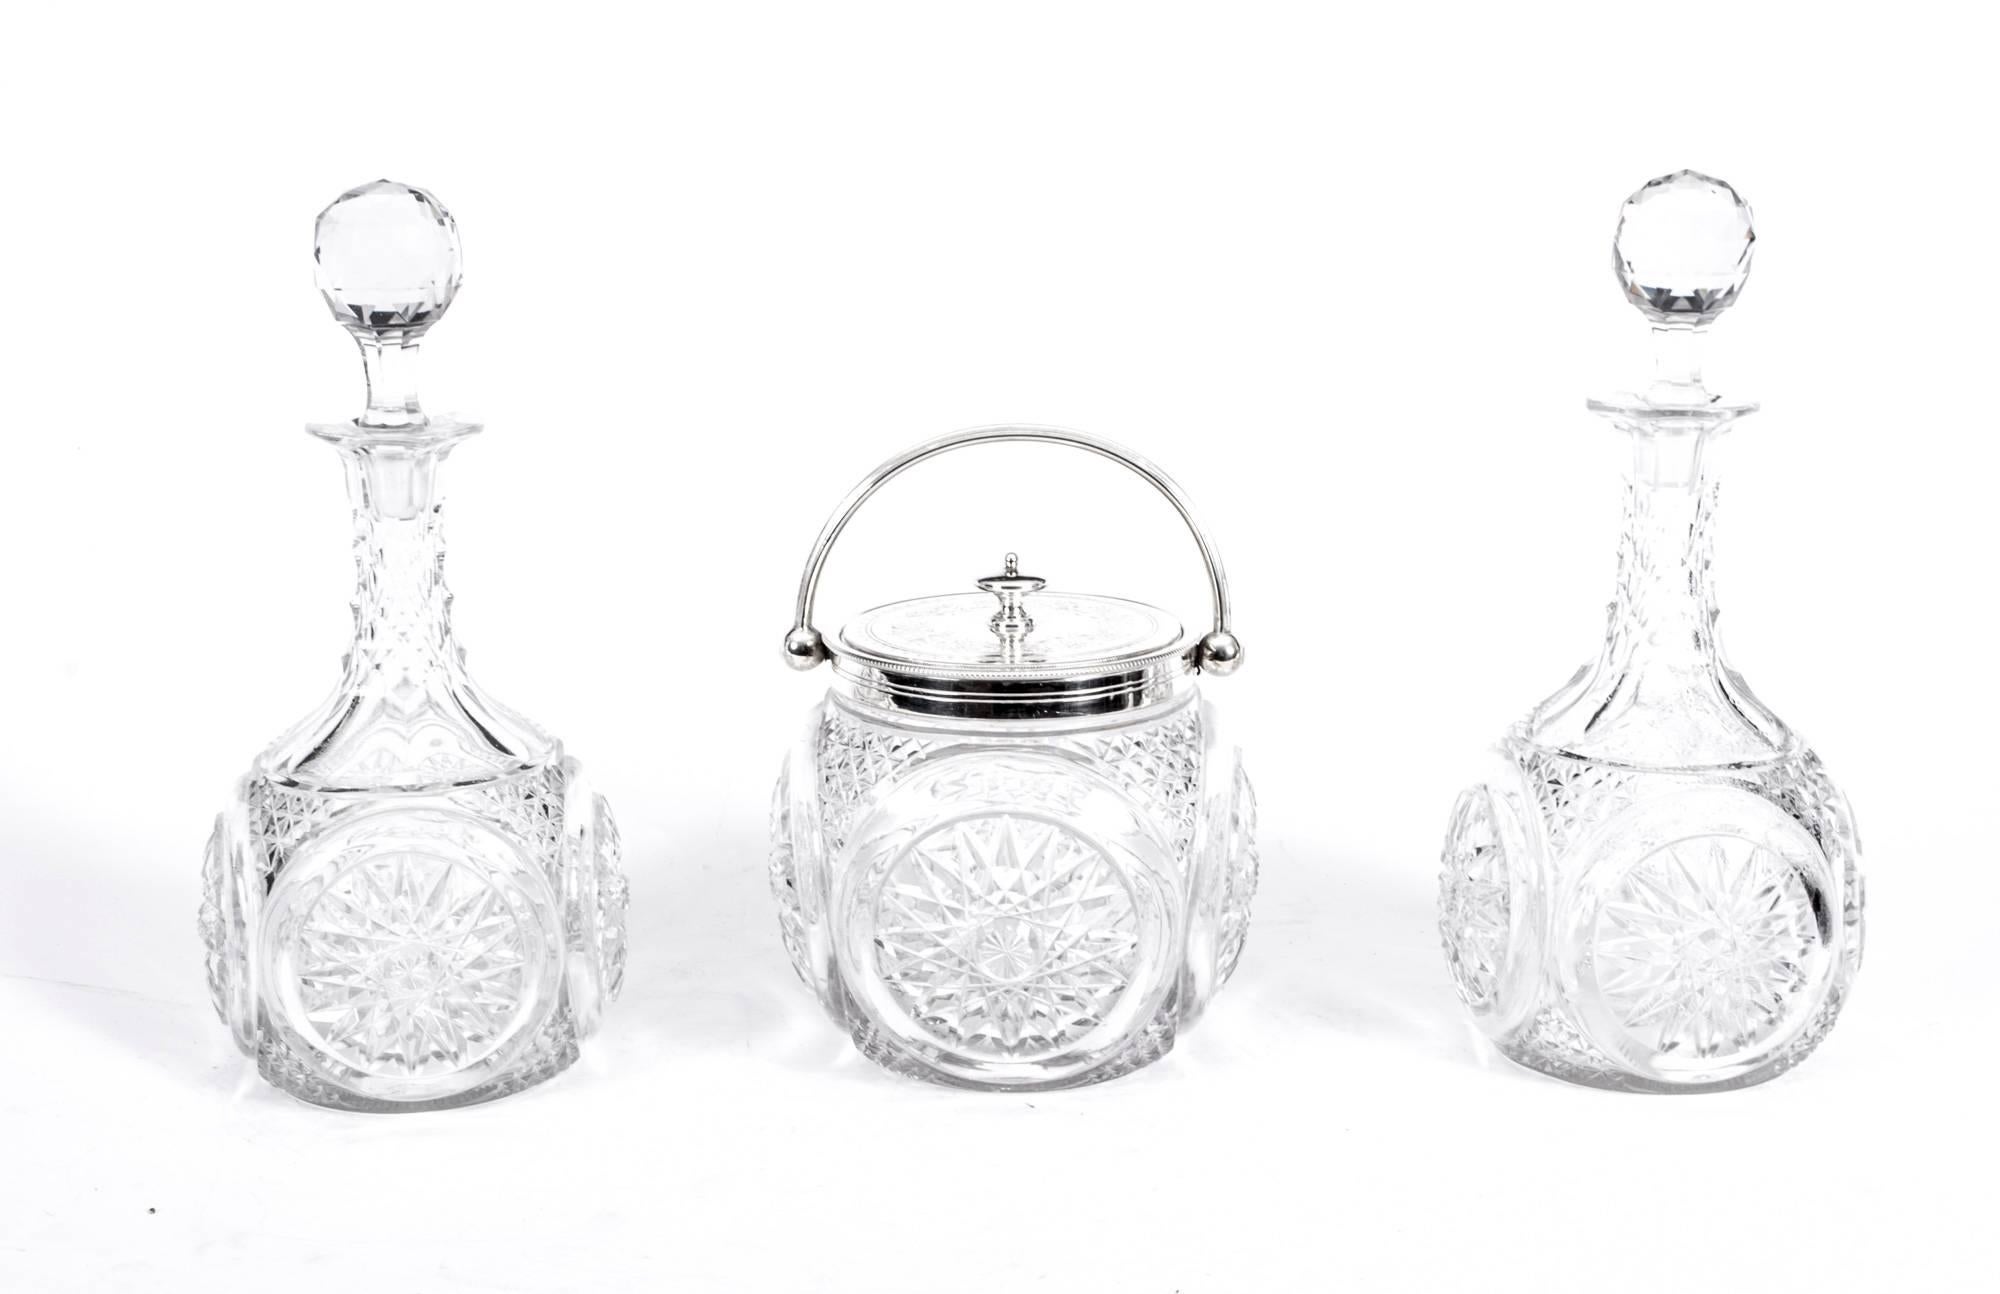 This is an attractive silver plated tantalus with two cut-glass decanters and a cut-glass and silver plate ice bucket in the Classic English style, circa 1880 in date.

It bears the makers mark GCW for G.C.Whiles of Birmingham England.

The